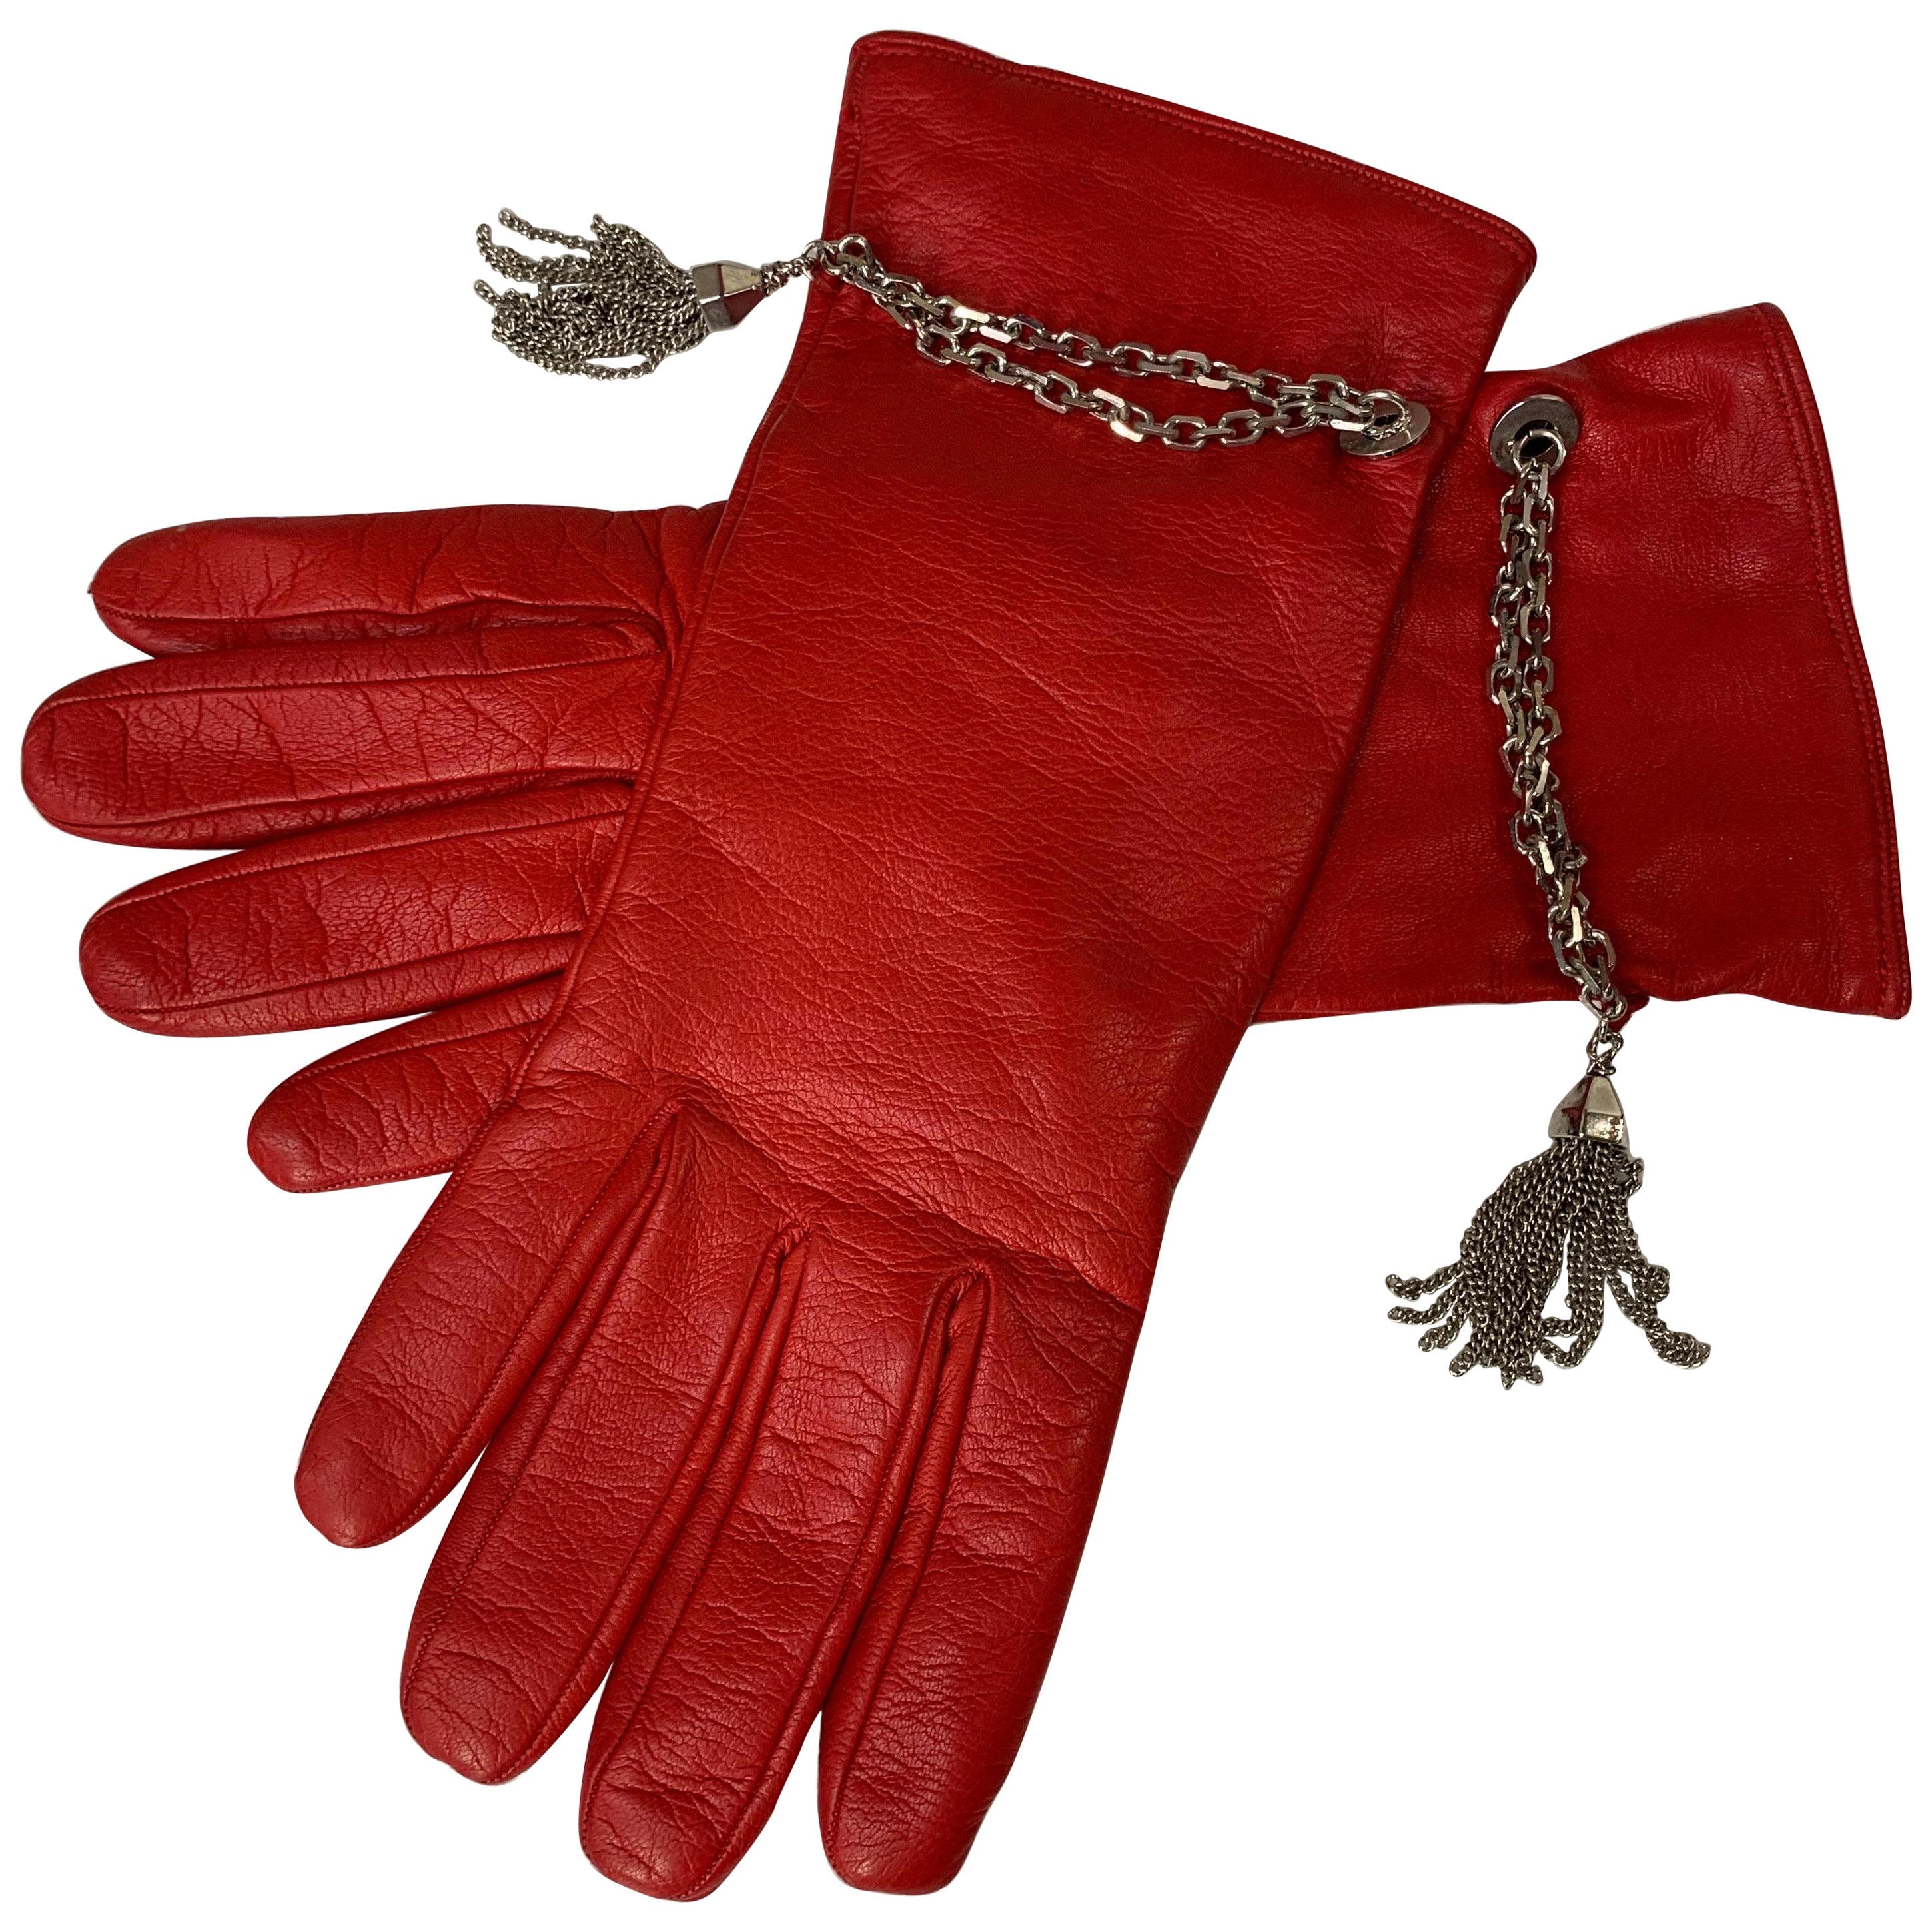 1980s Gianni Versace Red Kid Leather Gloves w Cashmere Lining & Tassel Chain  For Sale